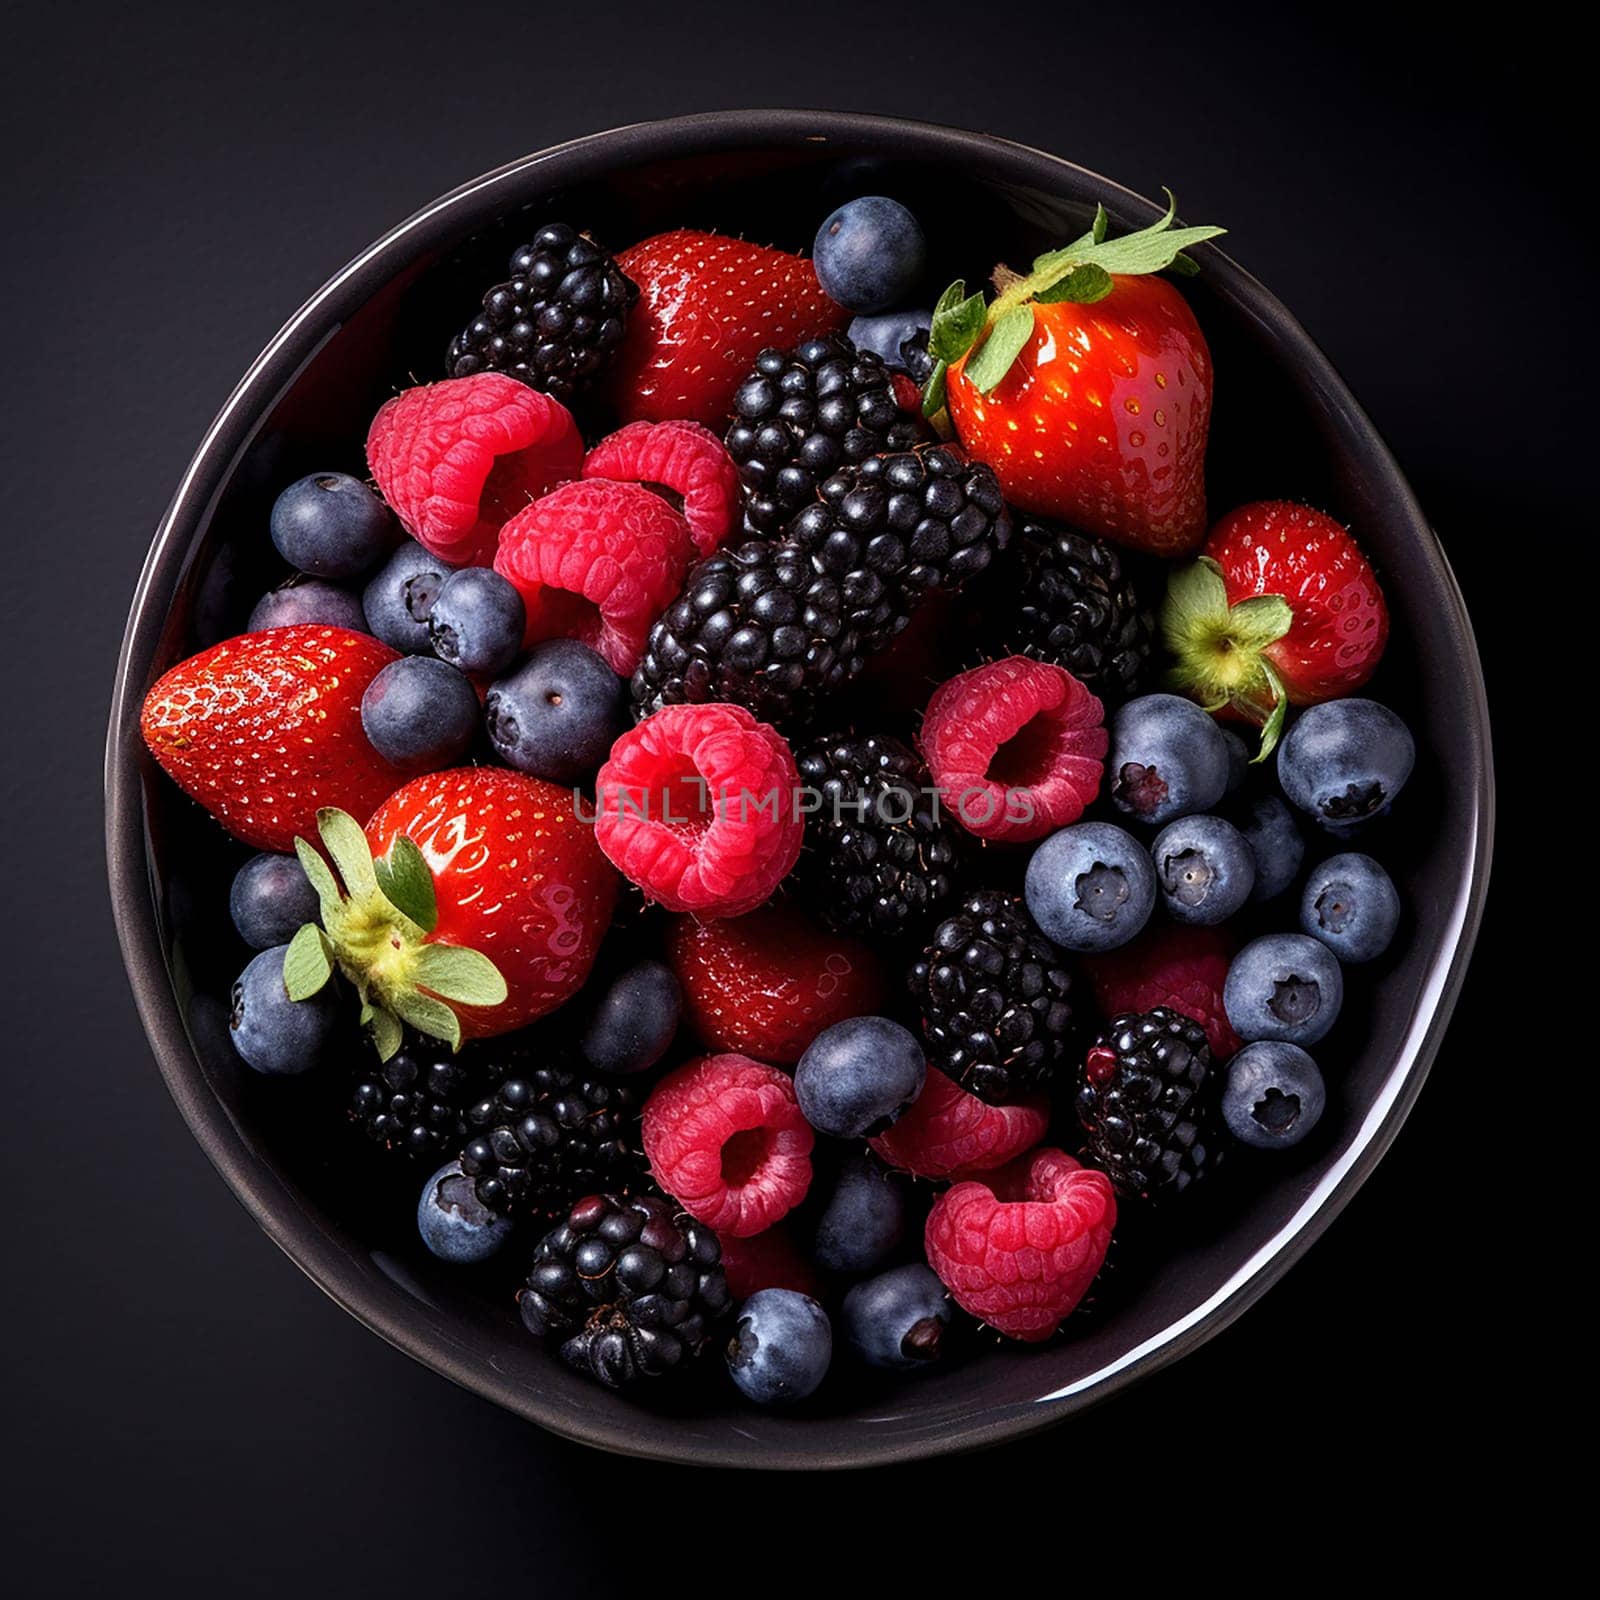 Assortment of raspberries and blueberries in a dish ready to be eaten